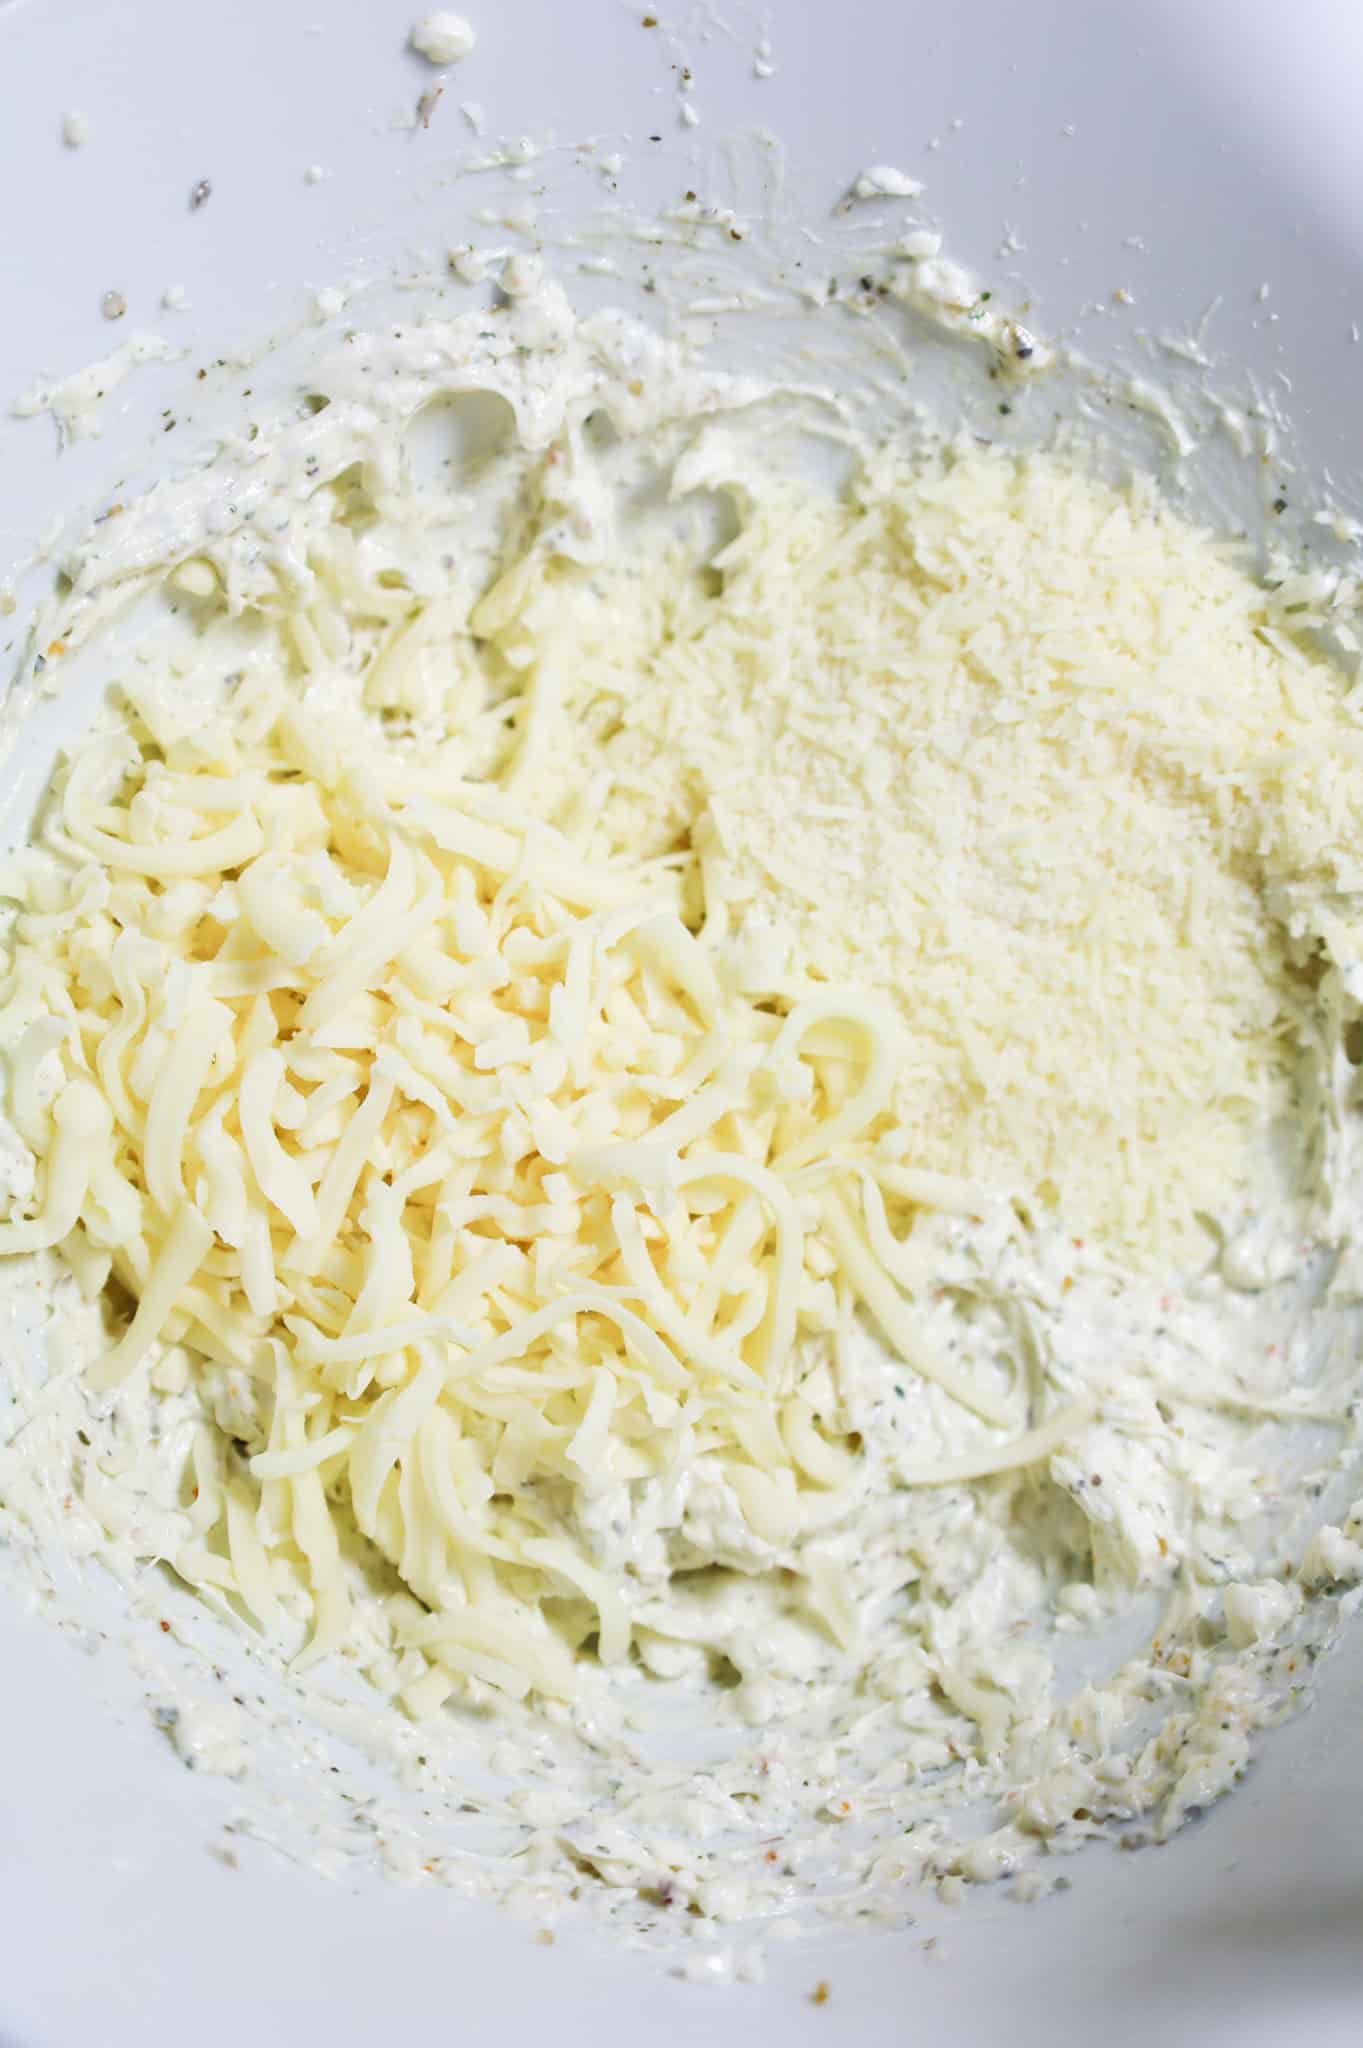 shredded mozzarella cheese and grated parmesan cheese on top of cream cheese mixture in a mixing bowl